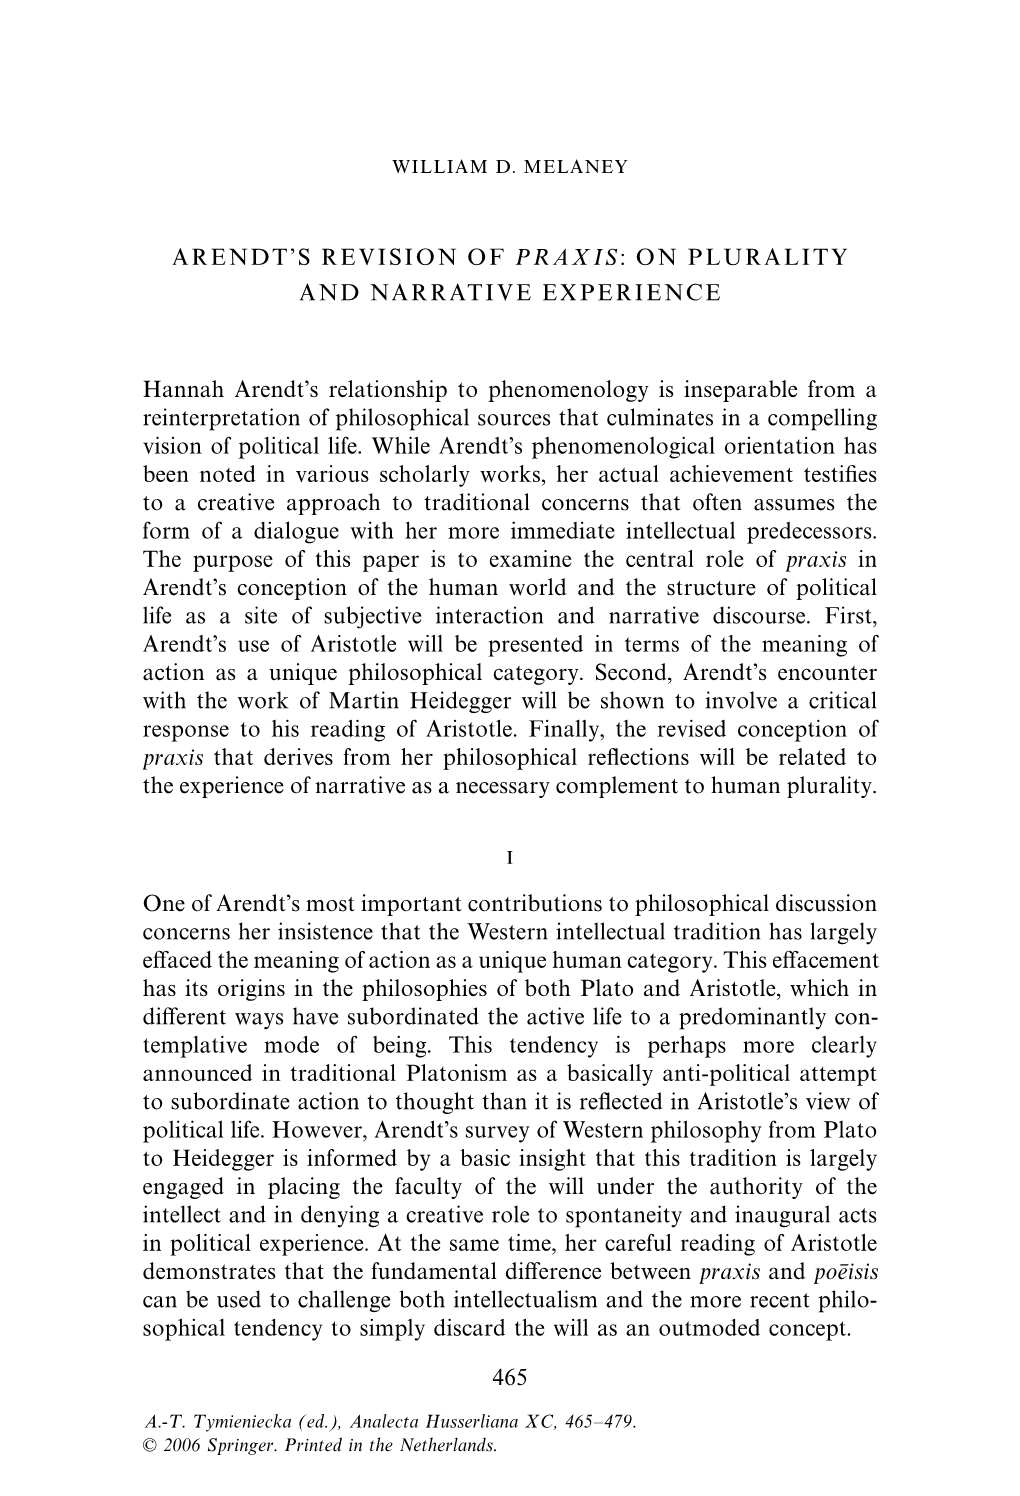 ARENDT's REVISION of PRAXIS: on PLURALITY and NARRATIVE EXPERIENCE Hannah Arendt's Relationship to Phenomenology Is Insepara